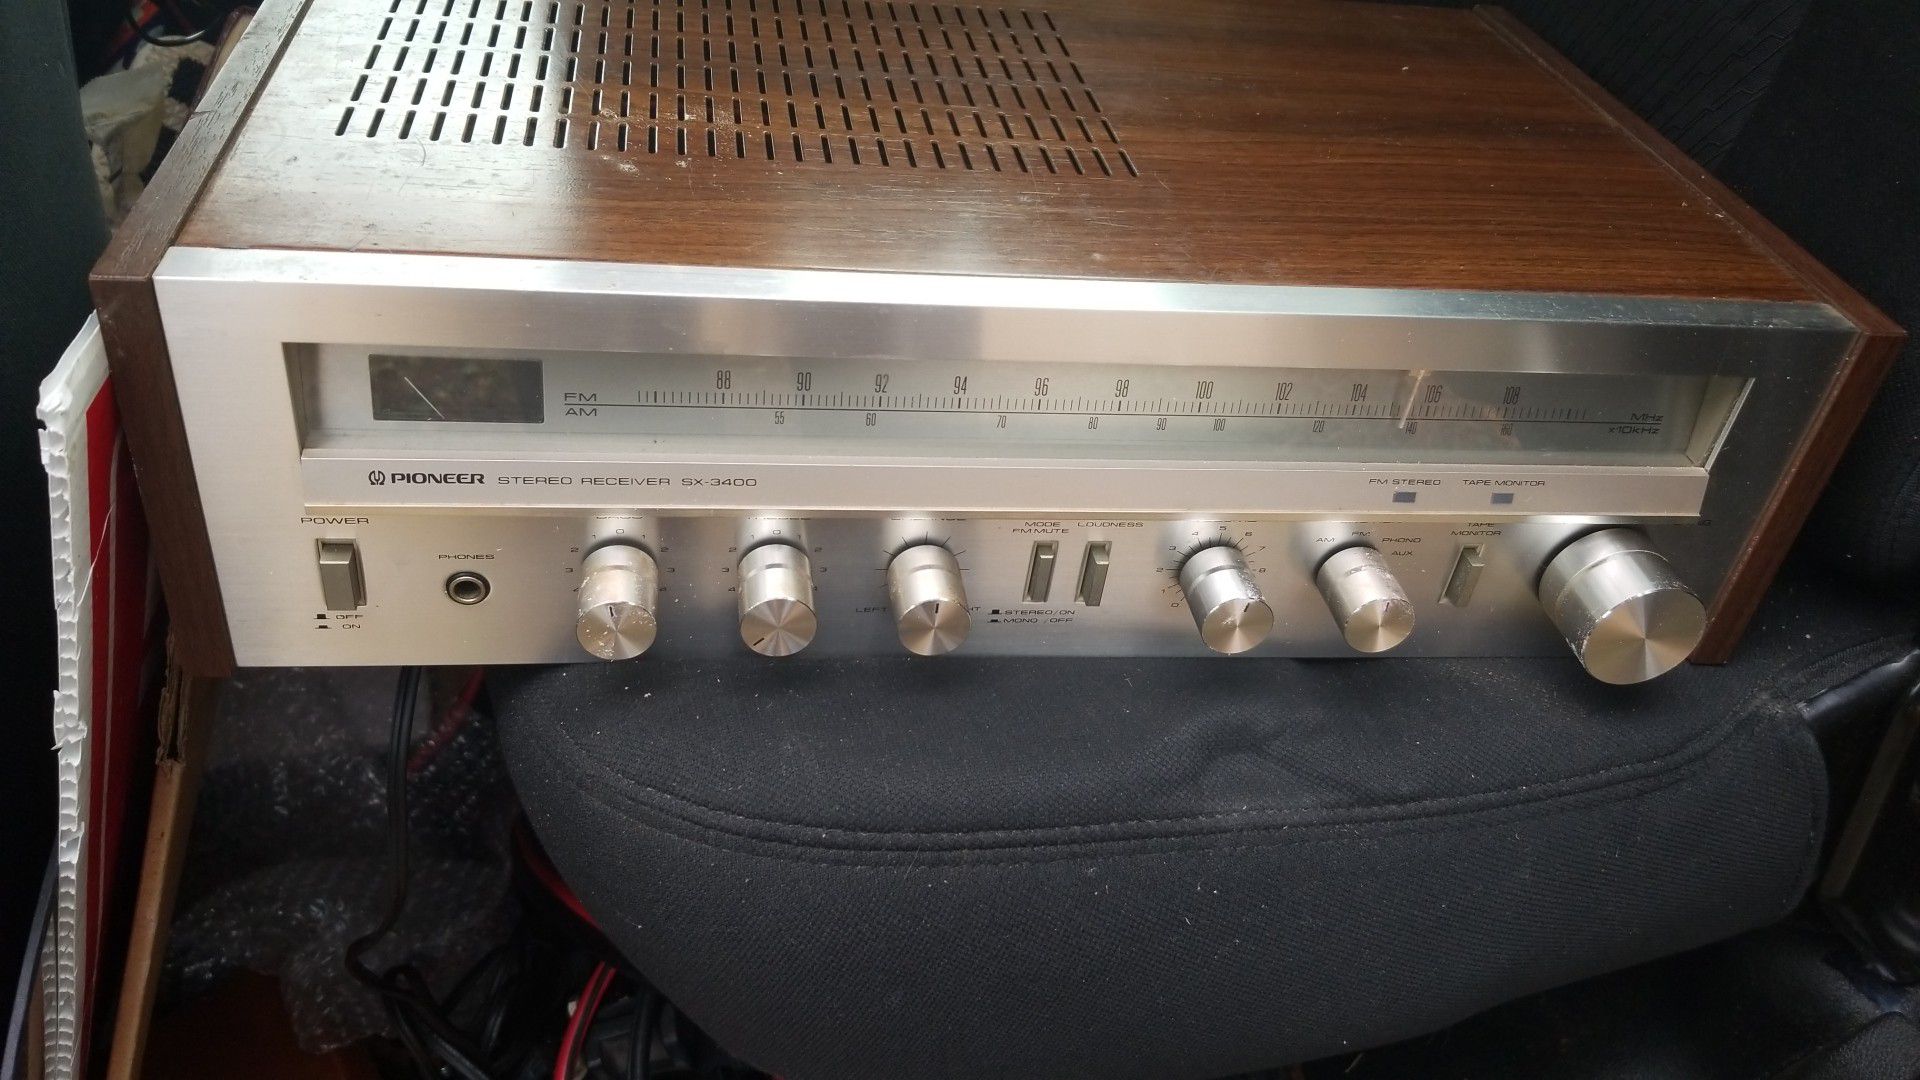 Pioneer Sx 3400 Stereo Receiver